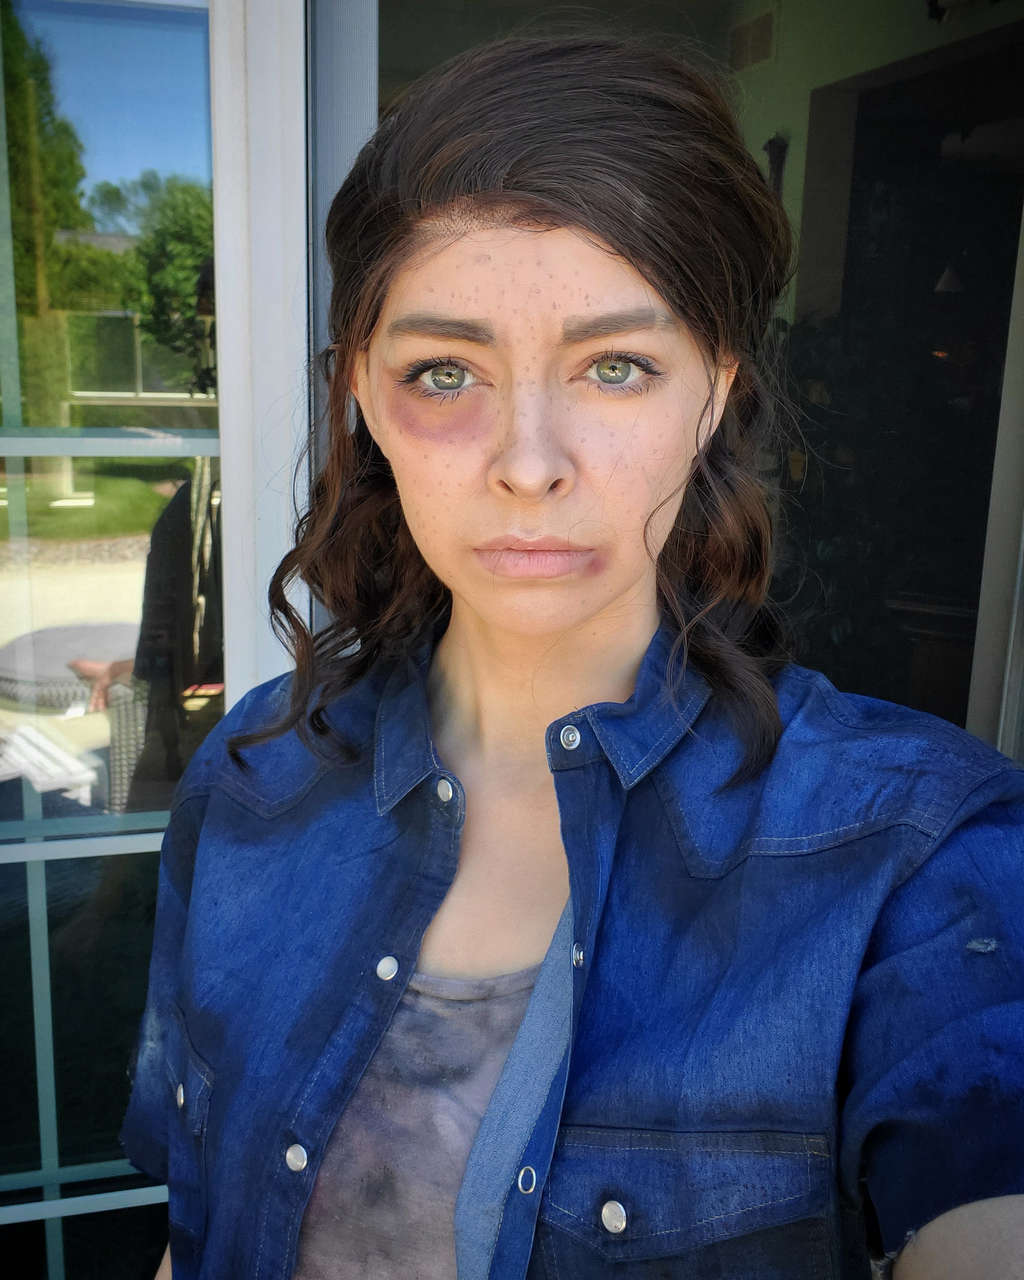 Ellie From The Last Of Us Makeup Test By Casabellacospla